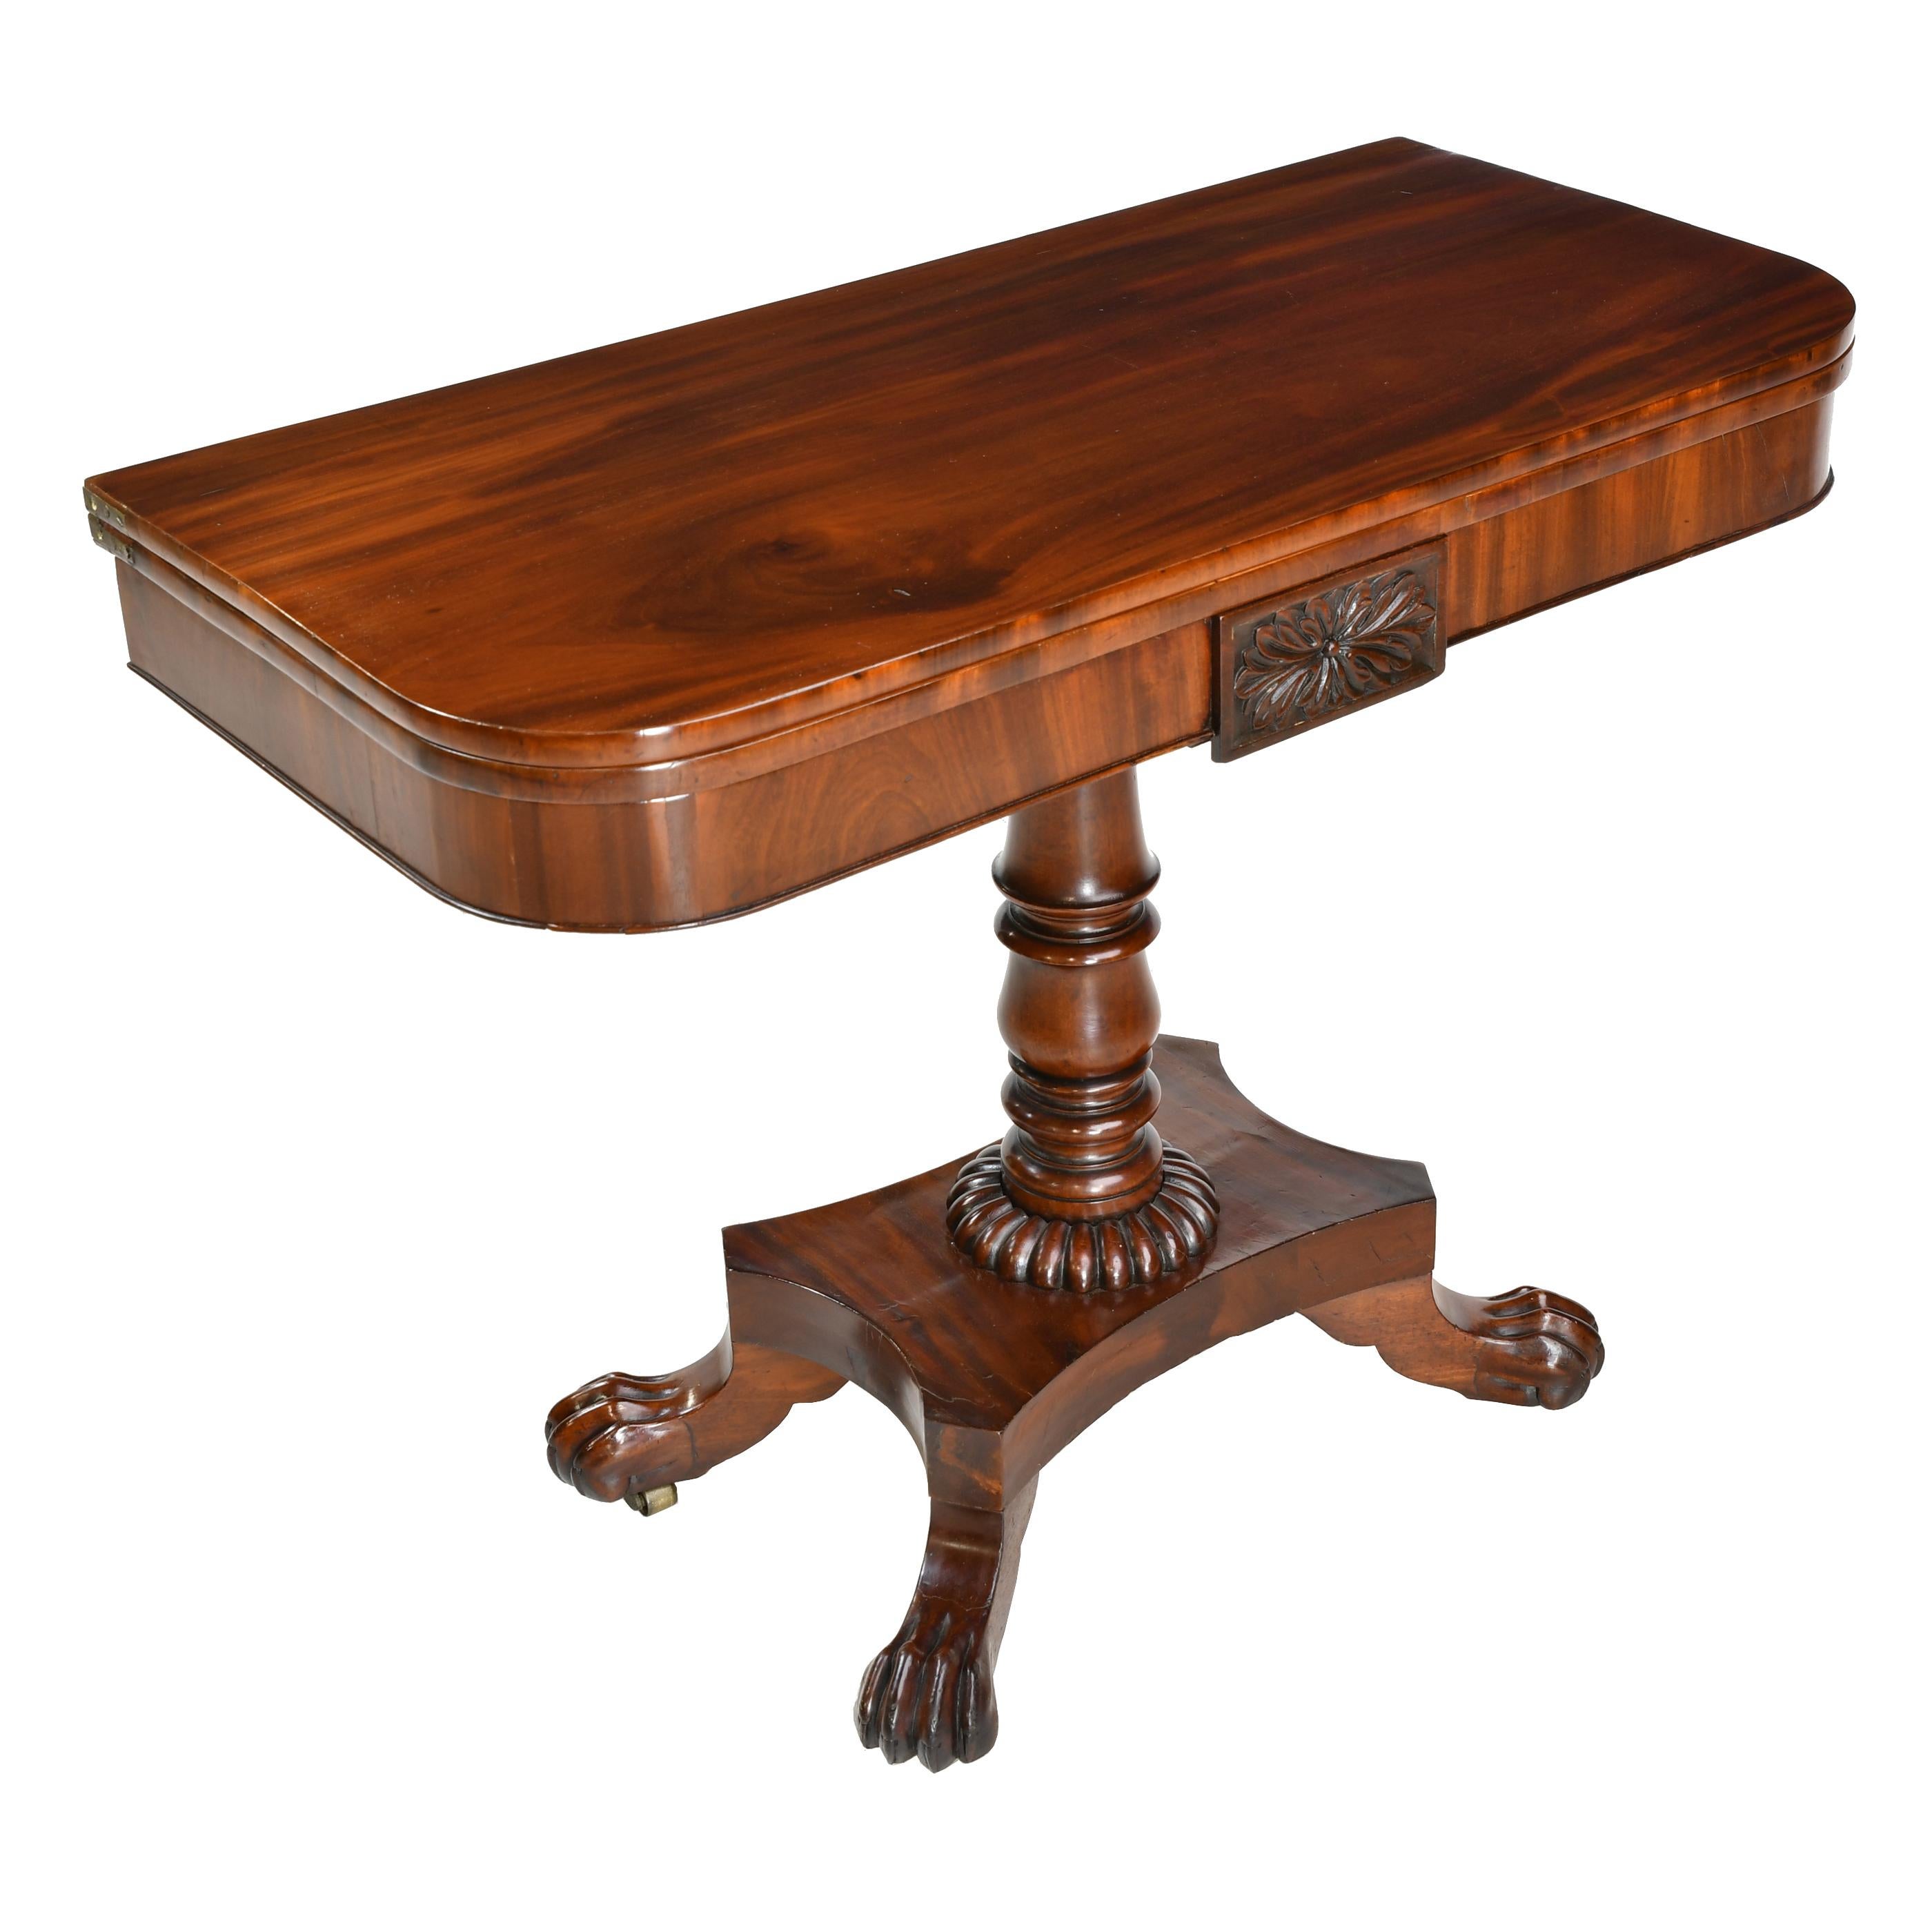 Mid-19th Century Antique American Empire Game/Card Table in West Indies Mahogany, circa 1830 For Sale